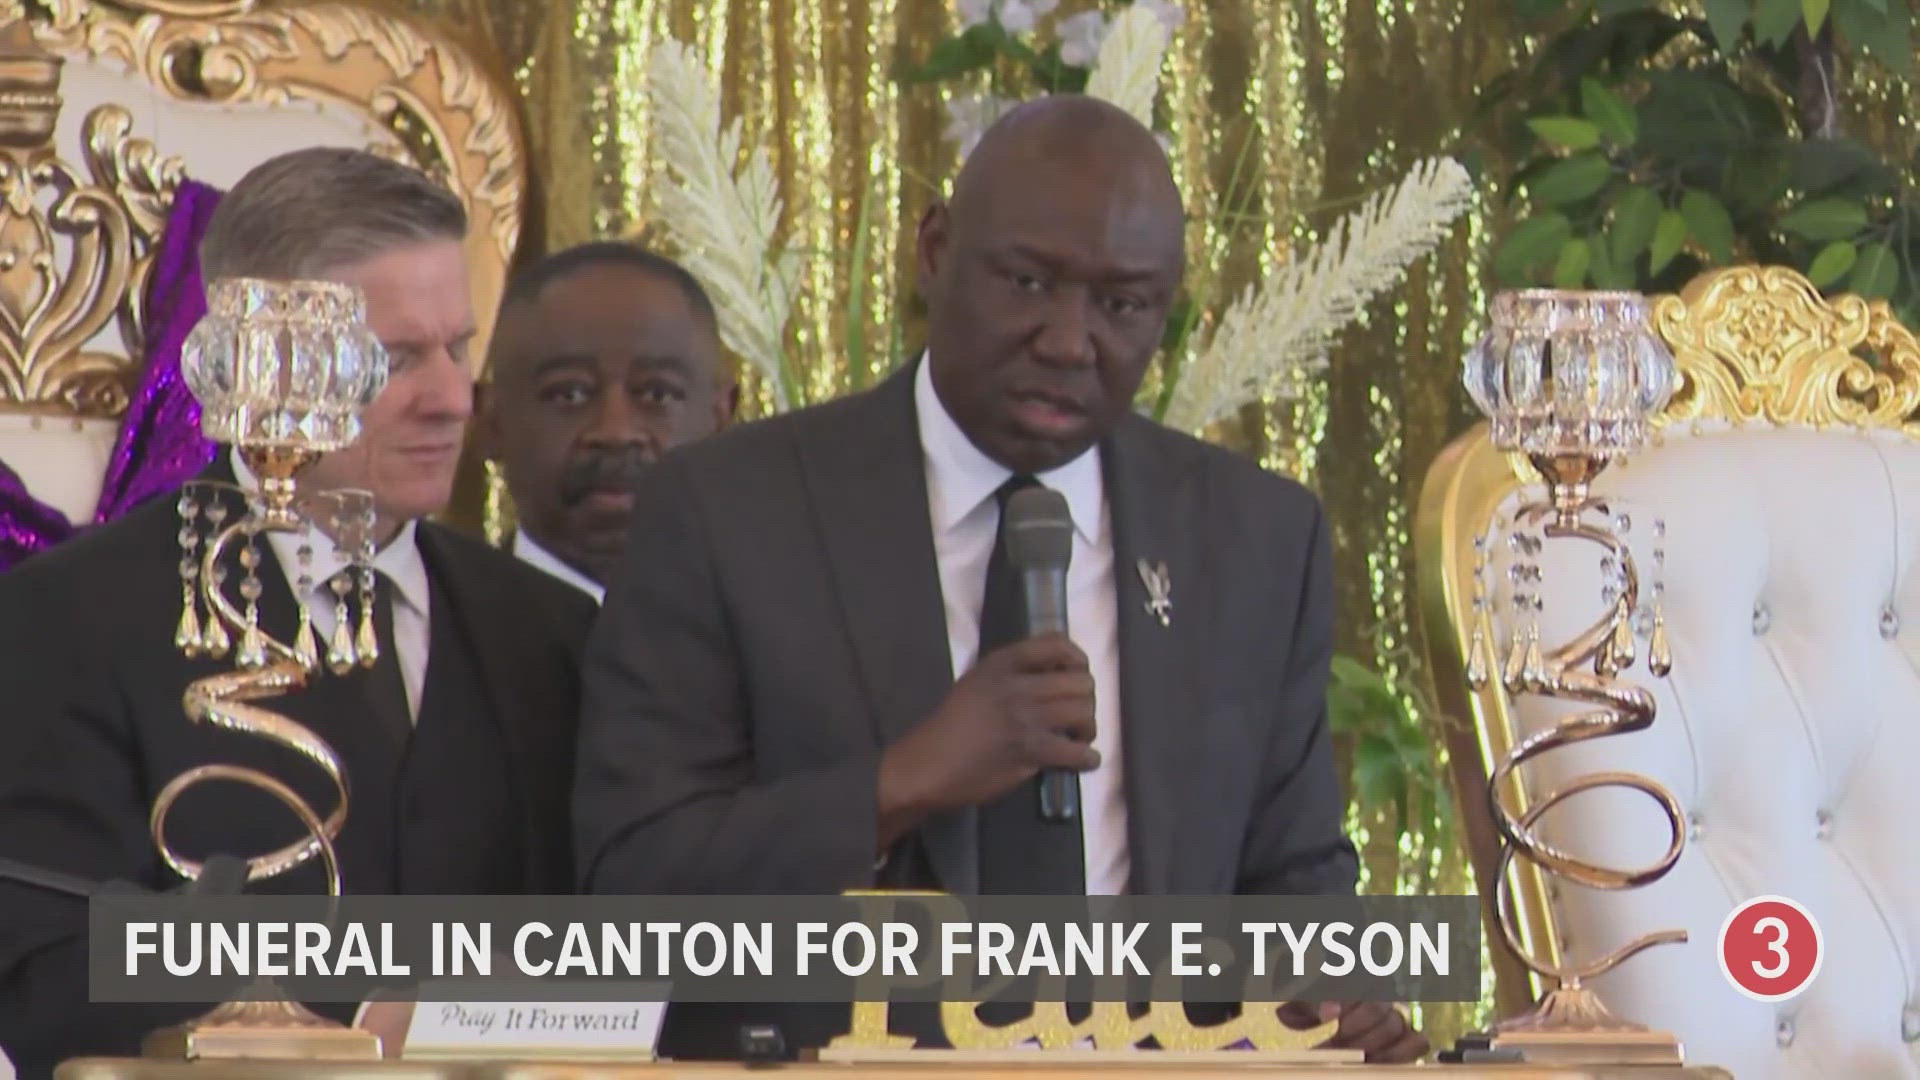 Attorney Ben Crump spoke in Canton during the funeral for Frank E. Tyson, the man who died last month in custody of police.